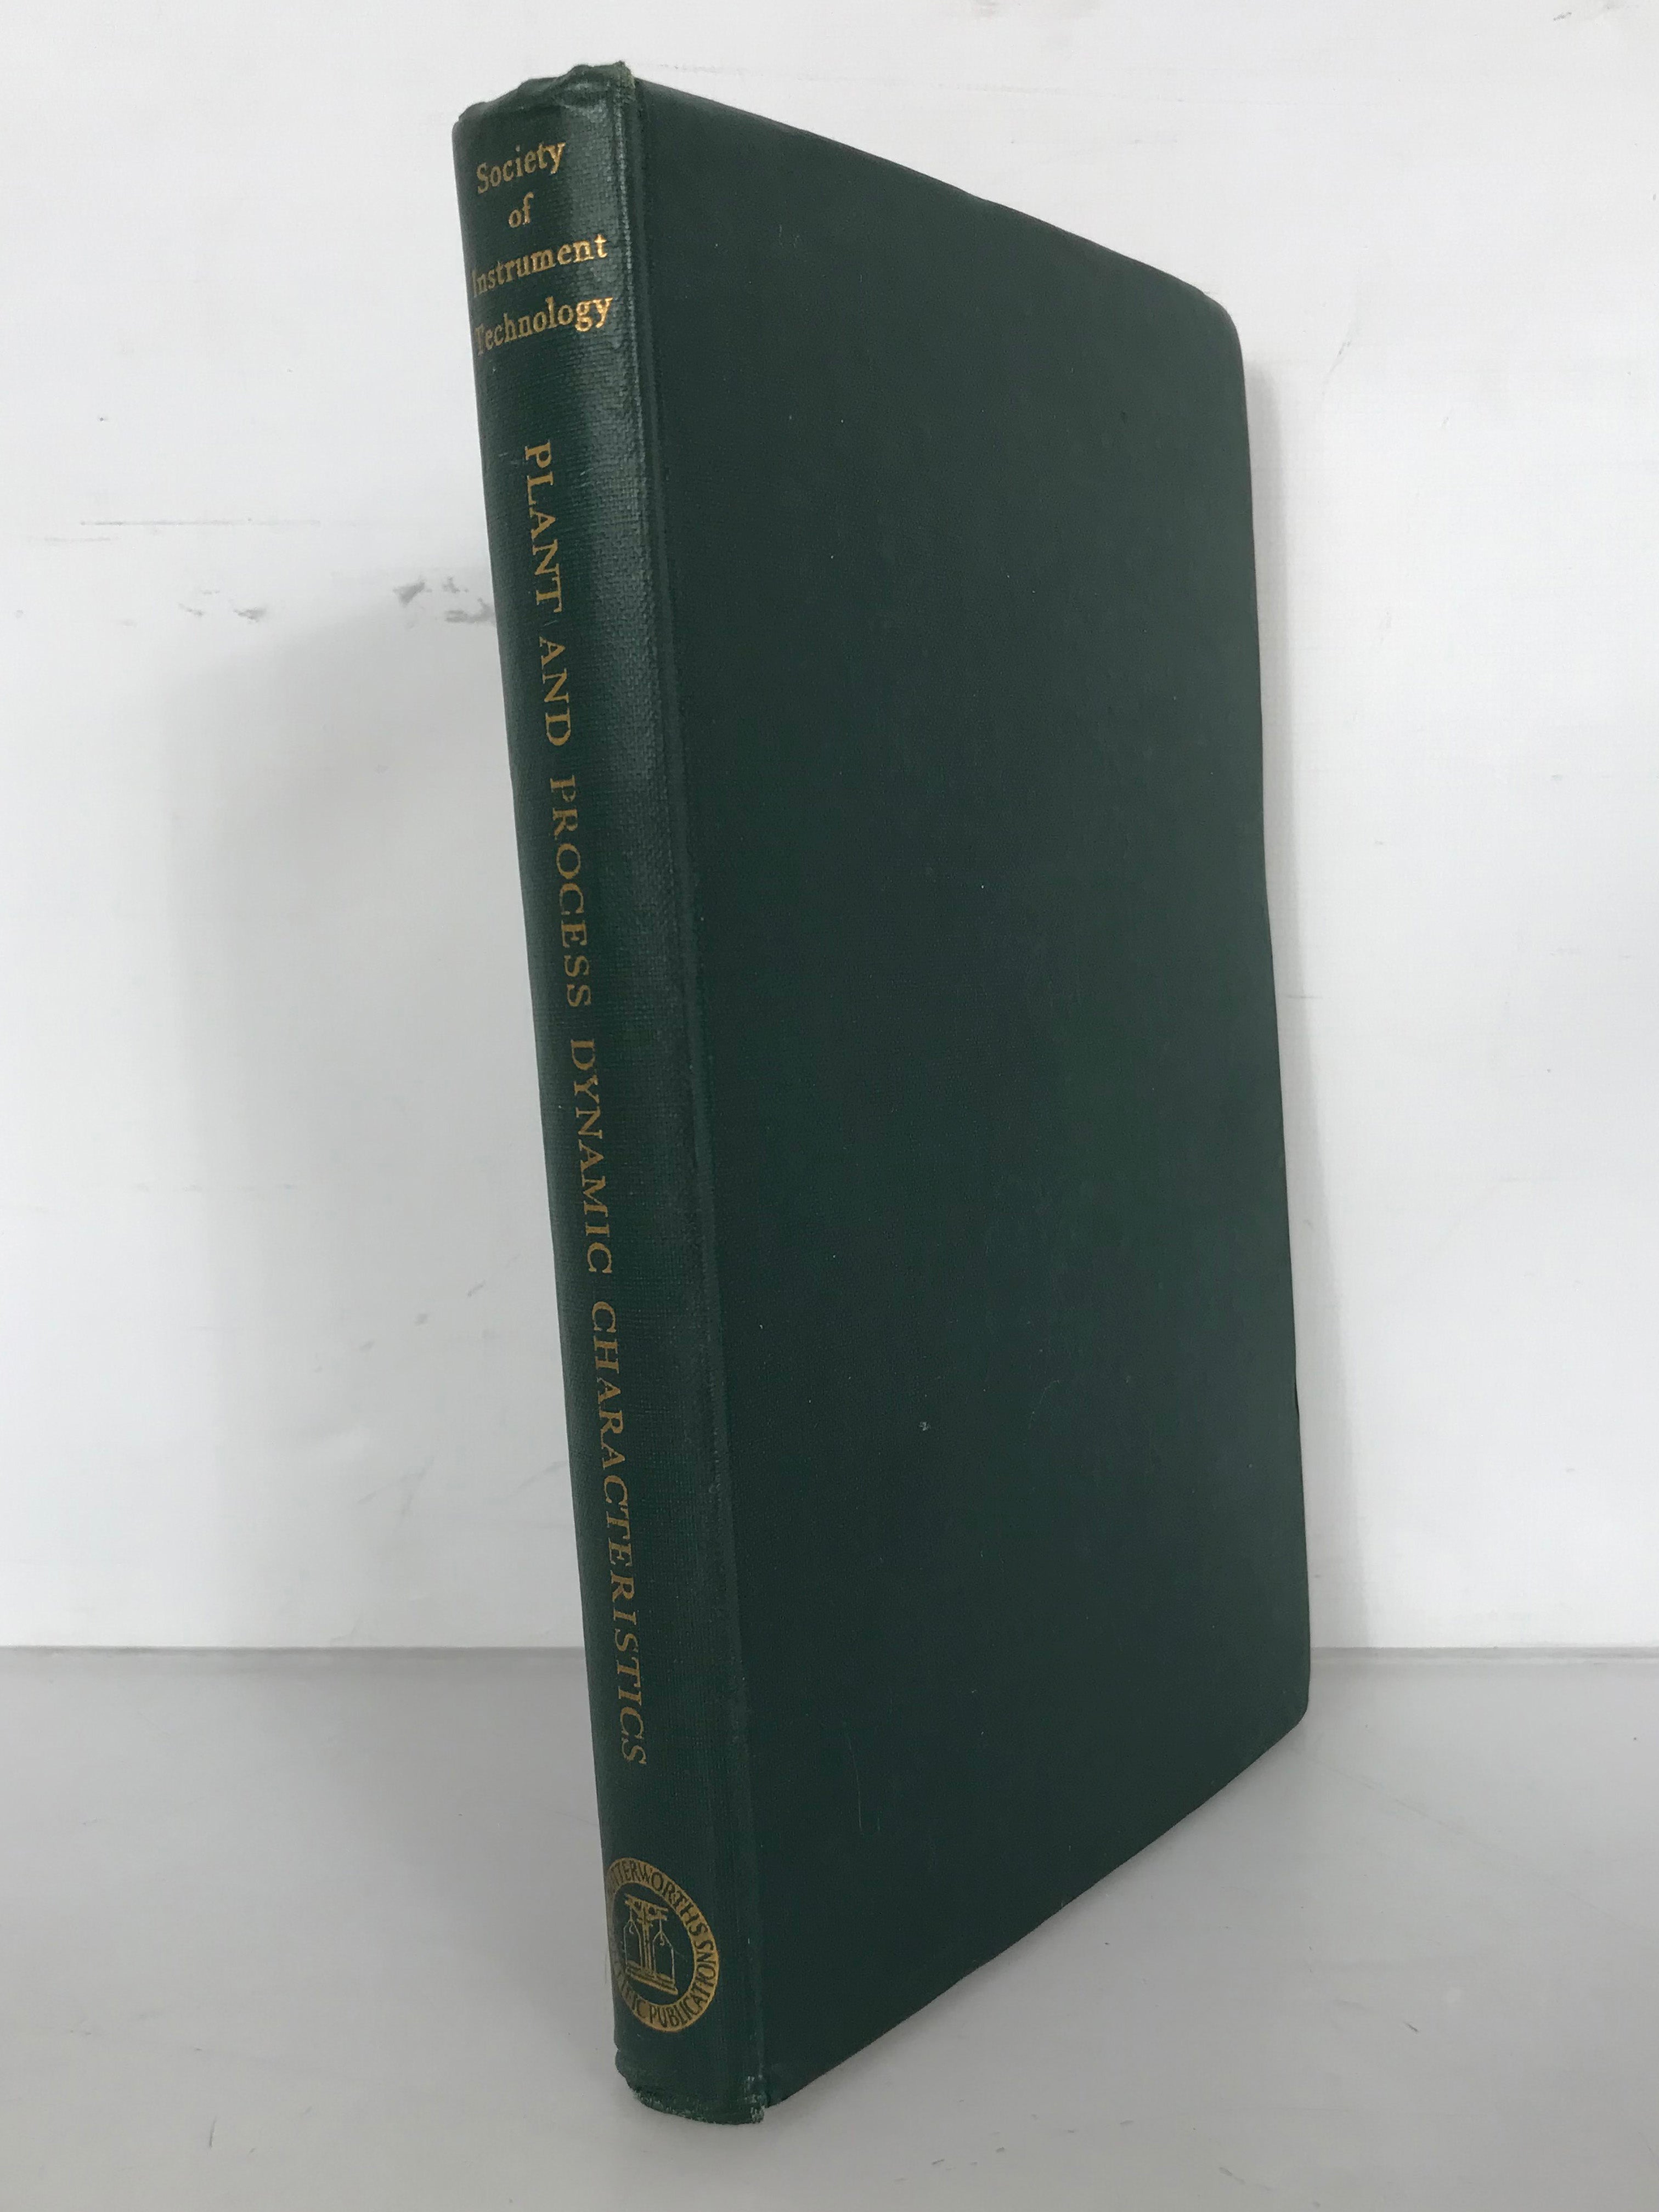 Plant and Process Dynamic Characteristics Society of Instrument Technology 1957